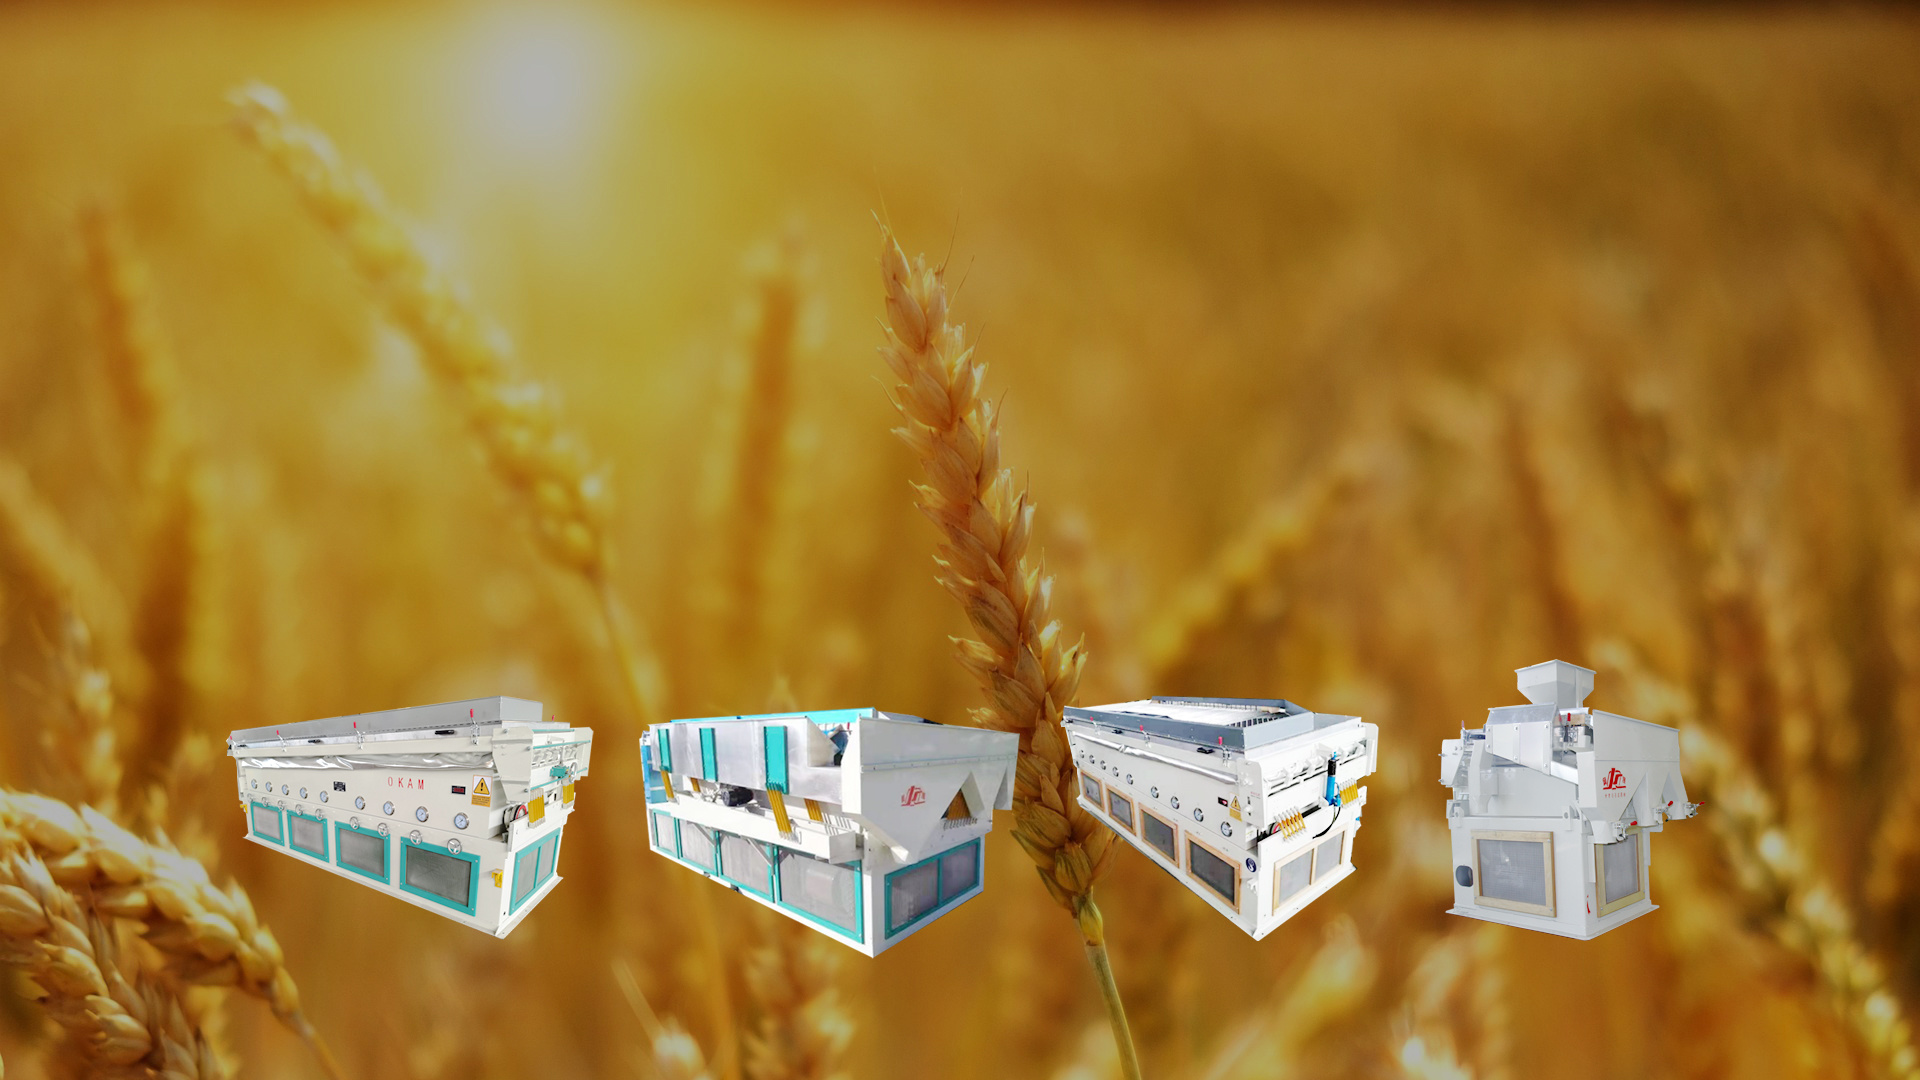 Based on the drying industry and dedicated to serving agriculture, rural areas, and farmers